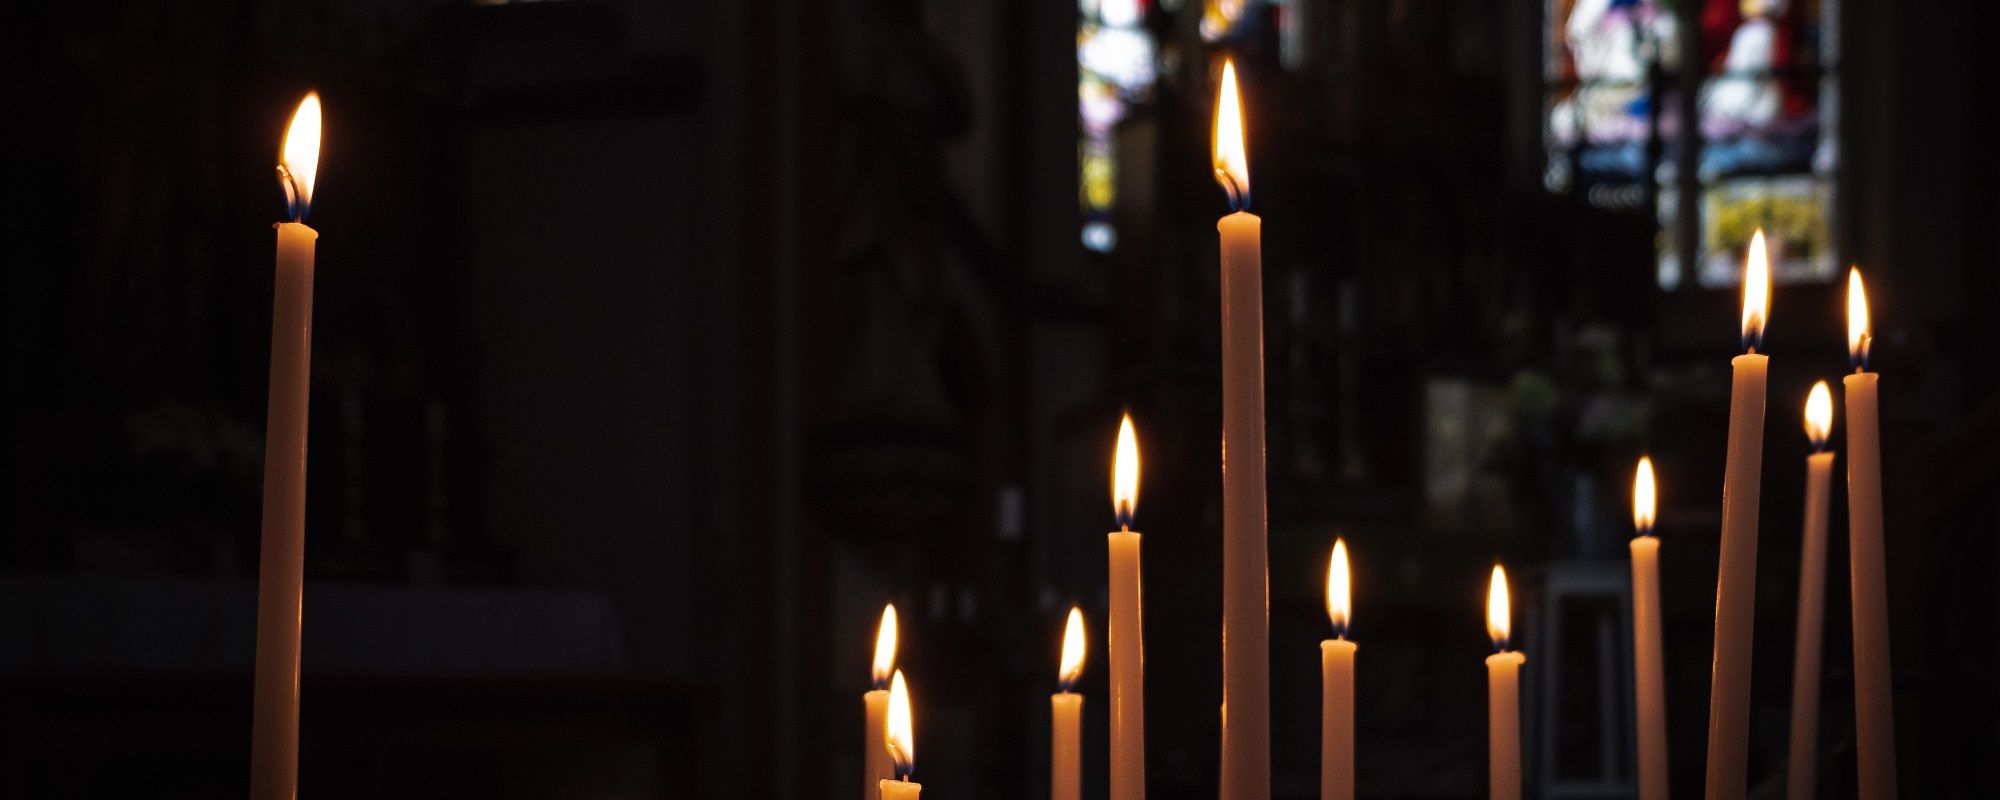 Candles In Religious Chapel